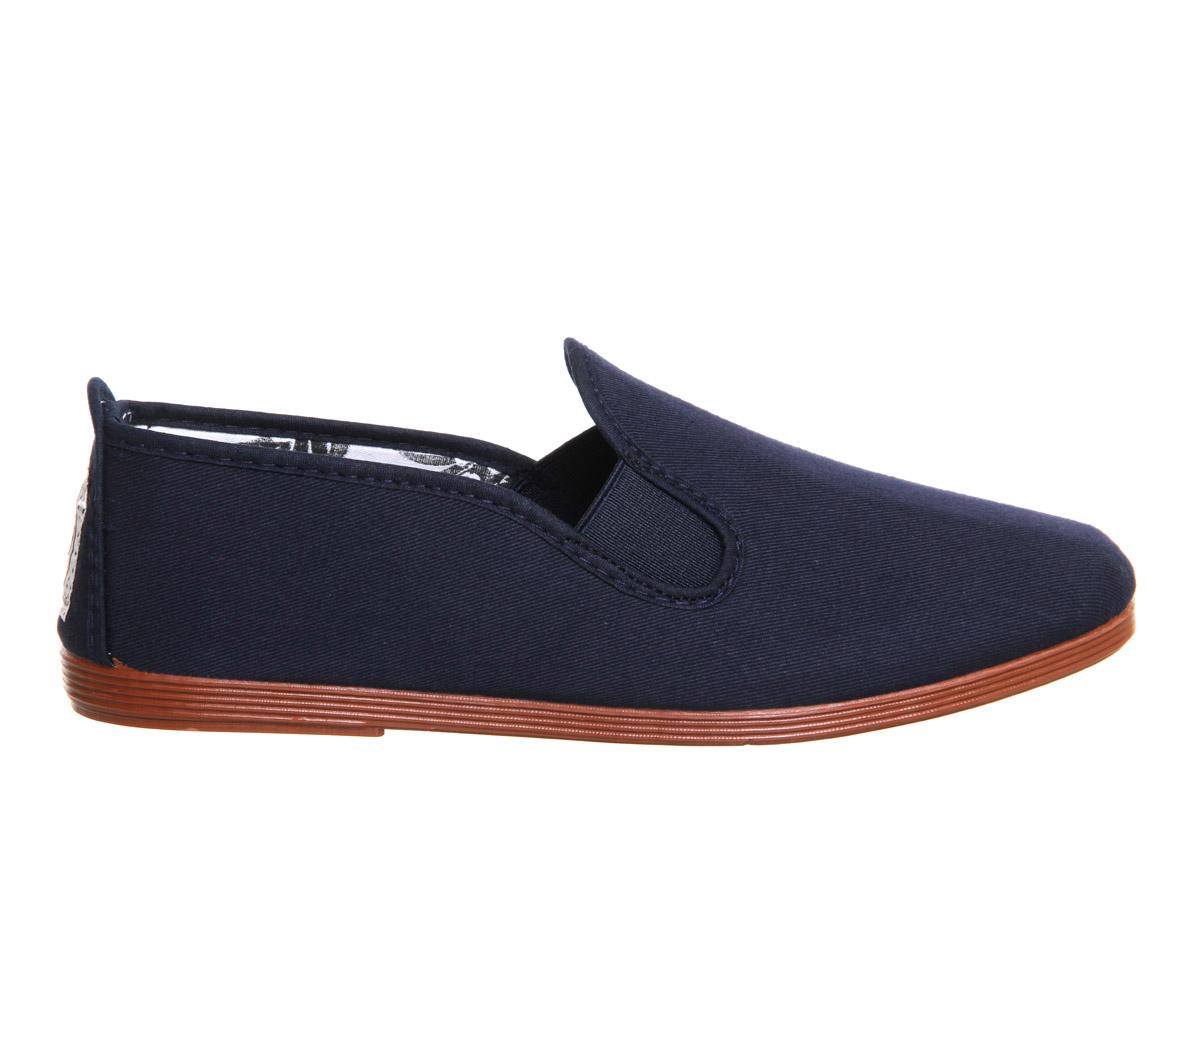 Flossy Flossy Elastic Pumps Navy Canvas - Flat Shoes for Women